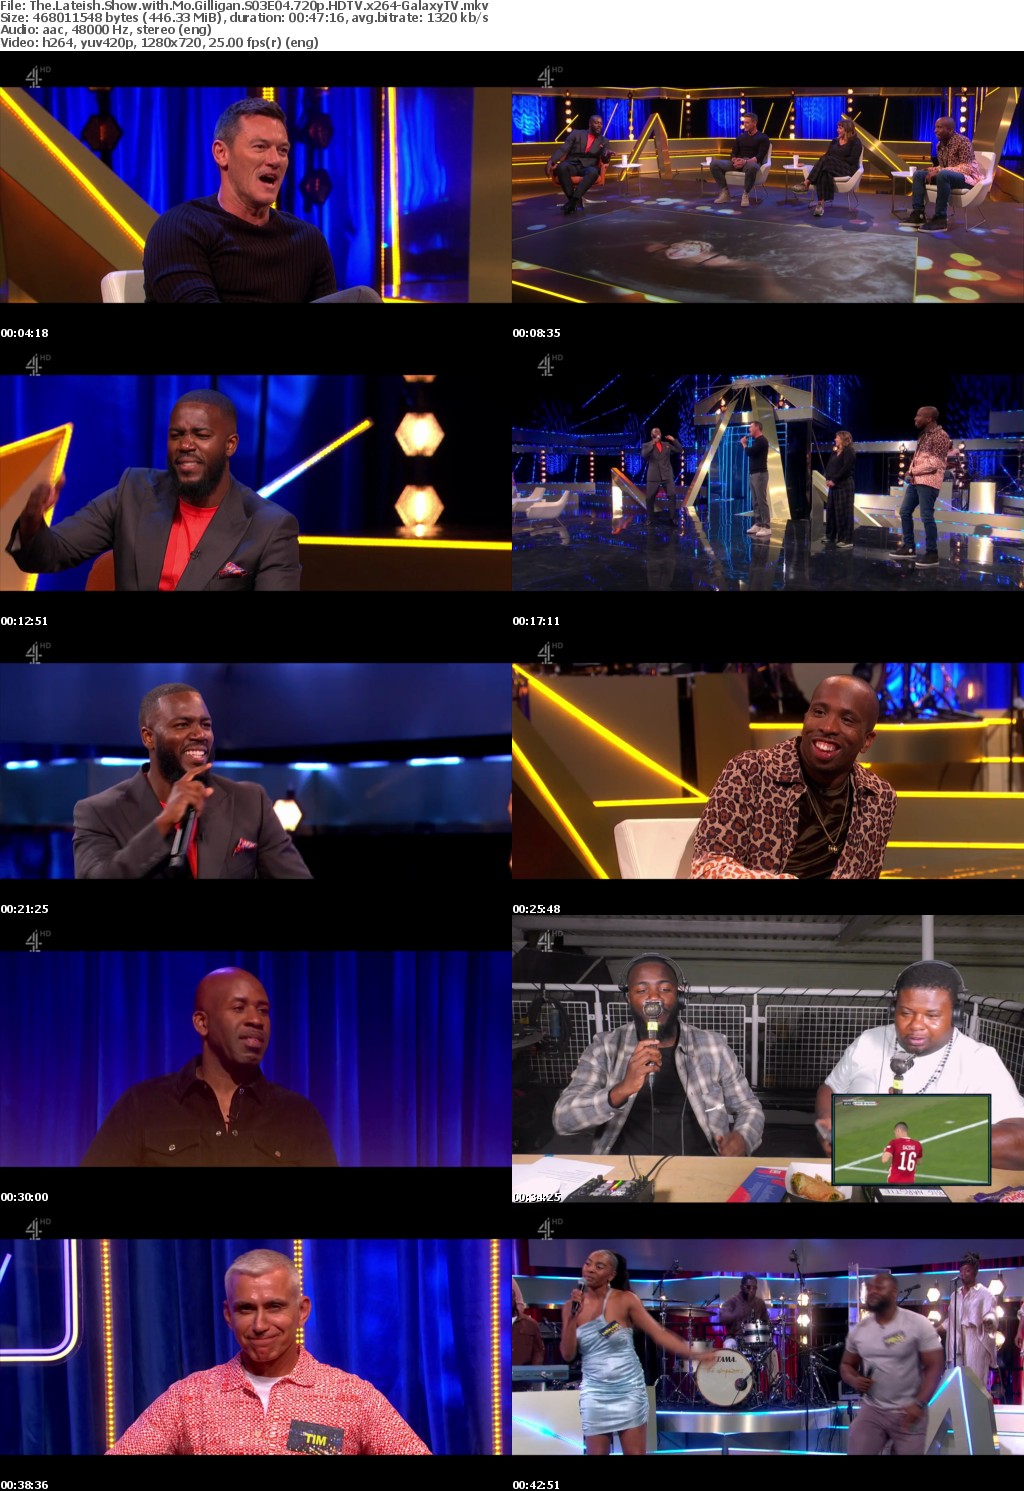 The Lateish Show With Mo Gilligan S03 COMPLETE 720p HDTV x264-GalaxyTV